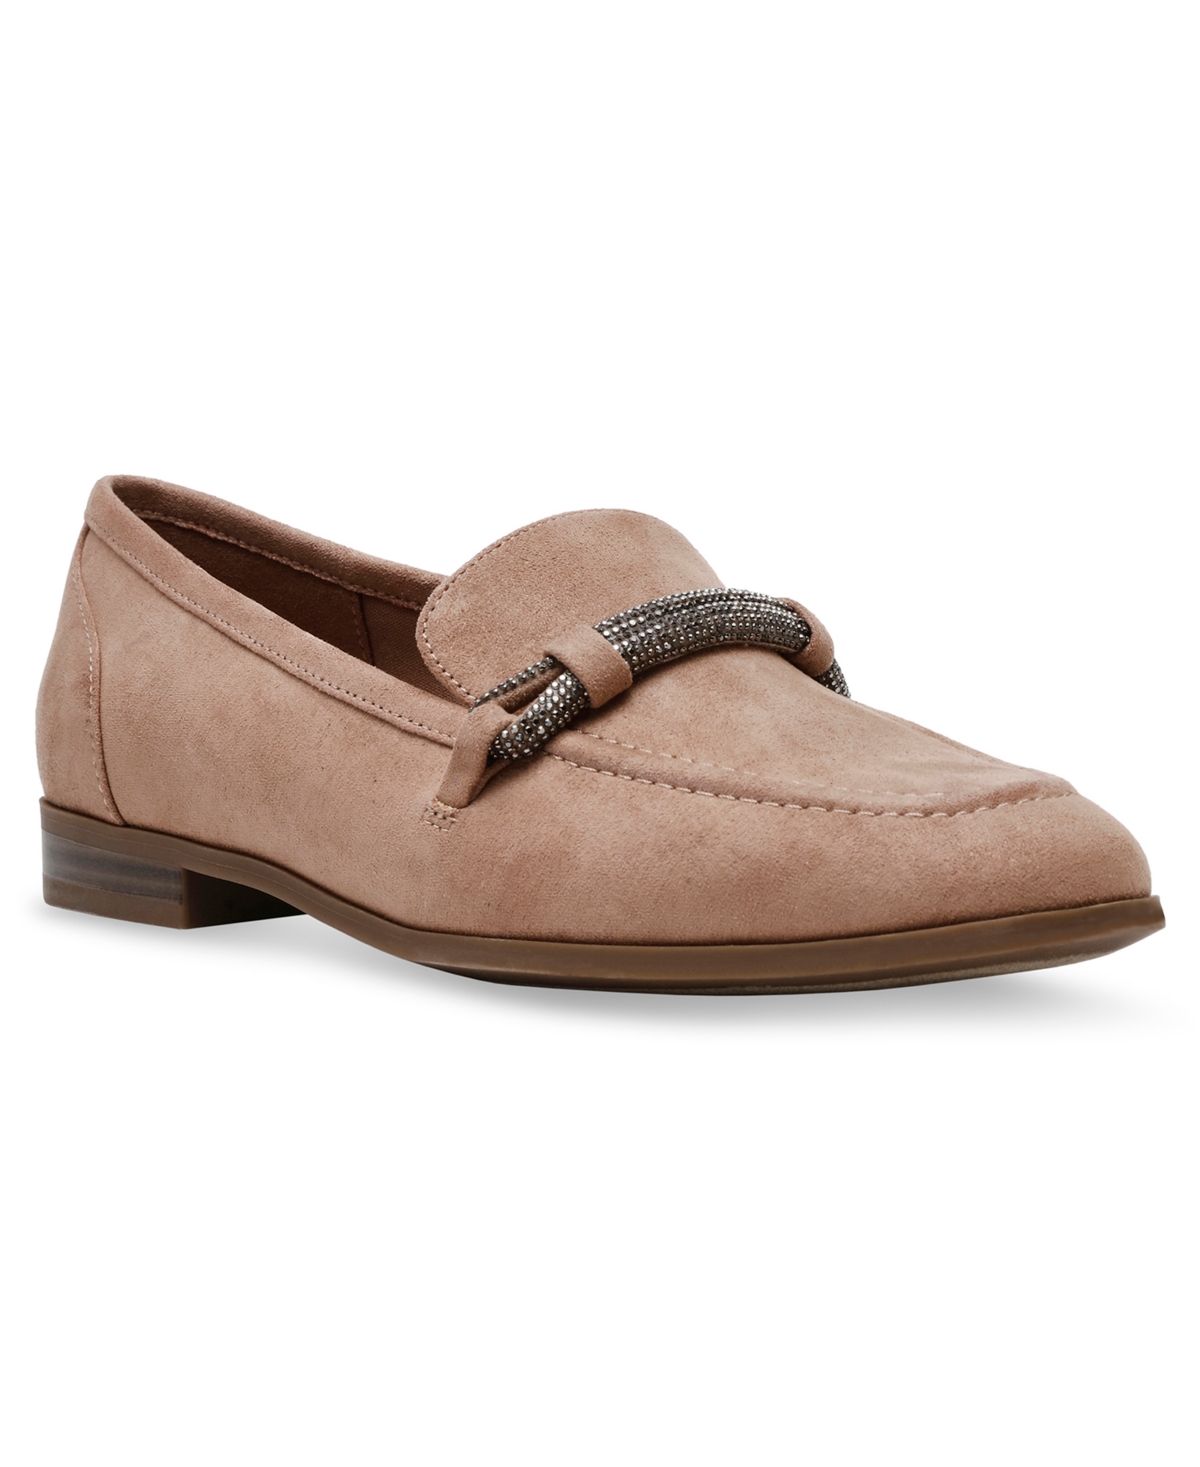 Women's Bowery Loafers - Taupe MS Crystal